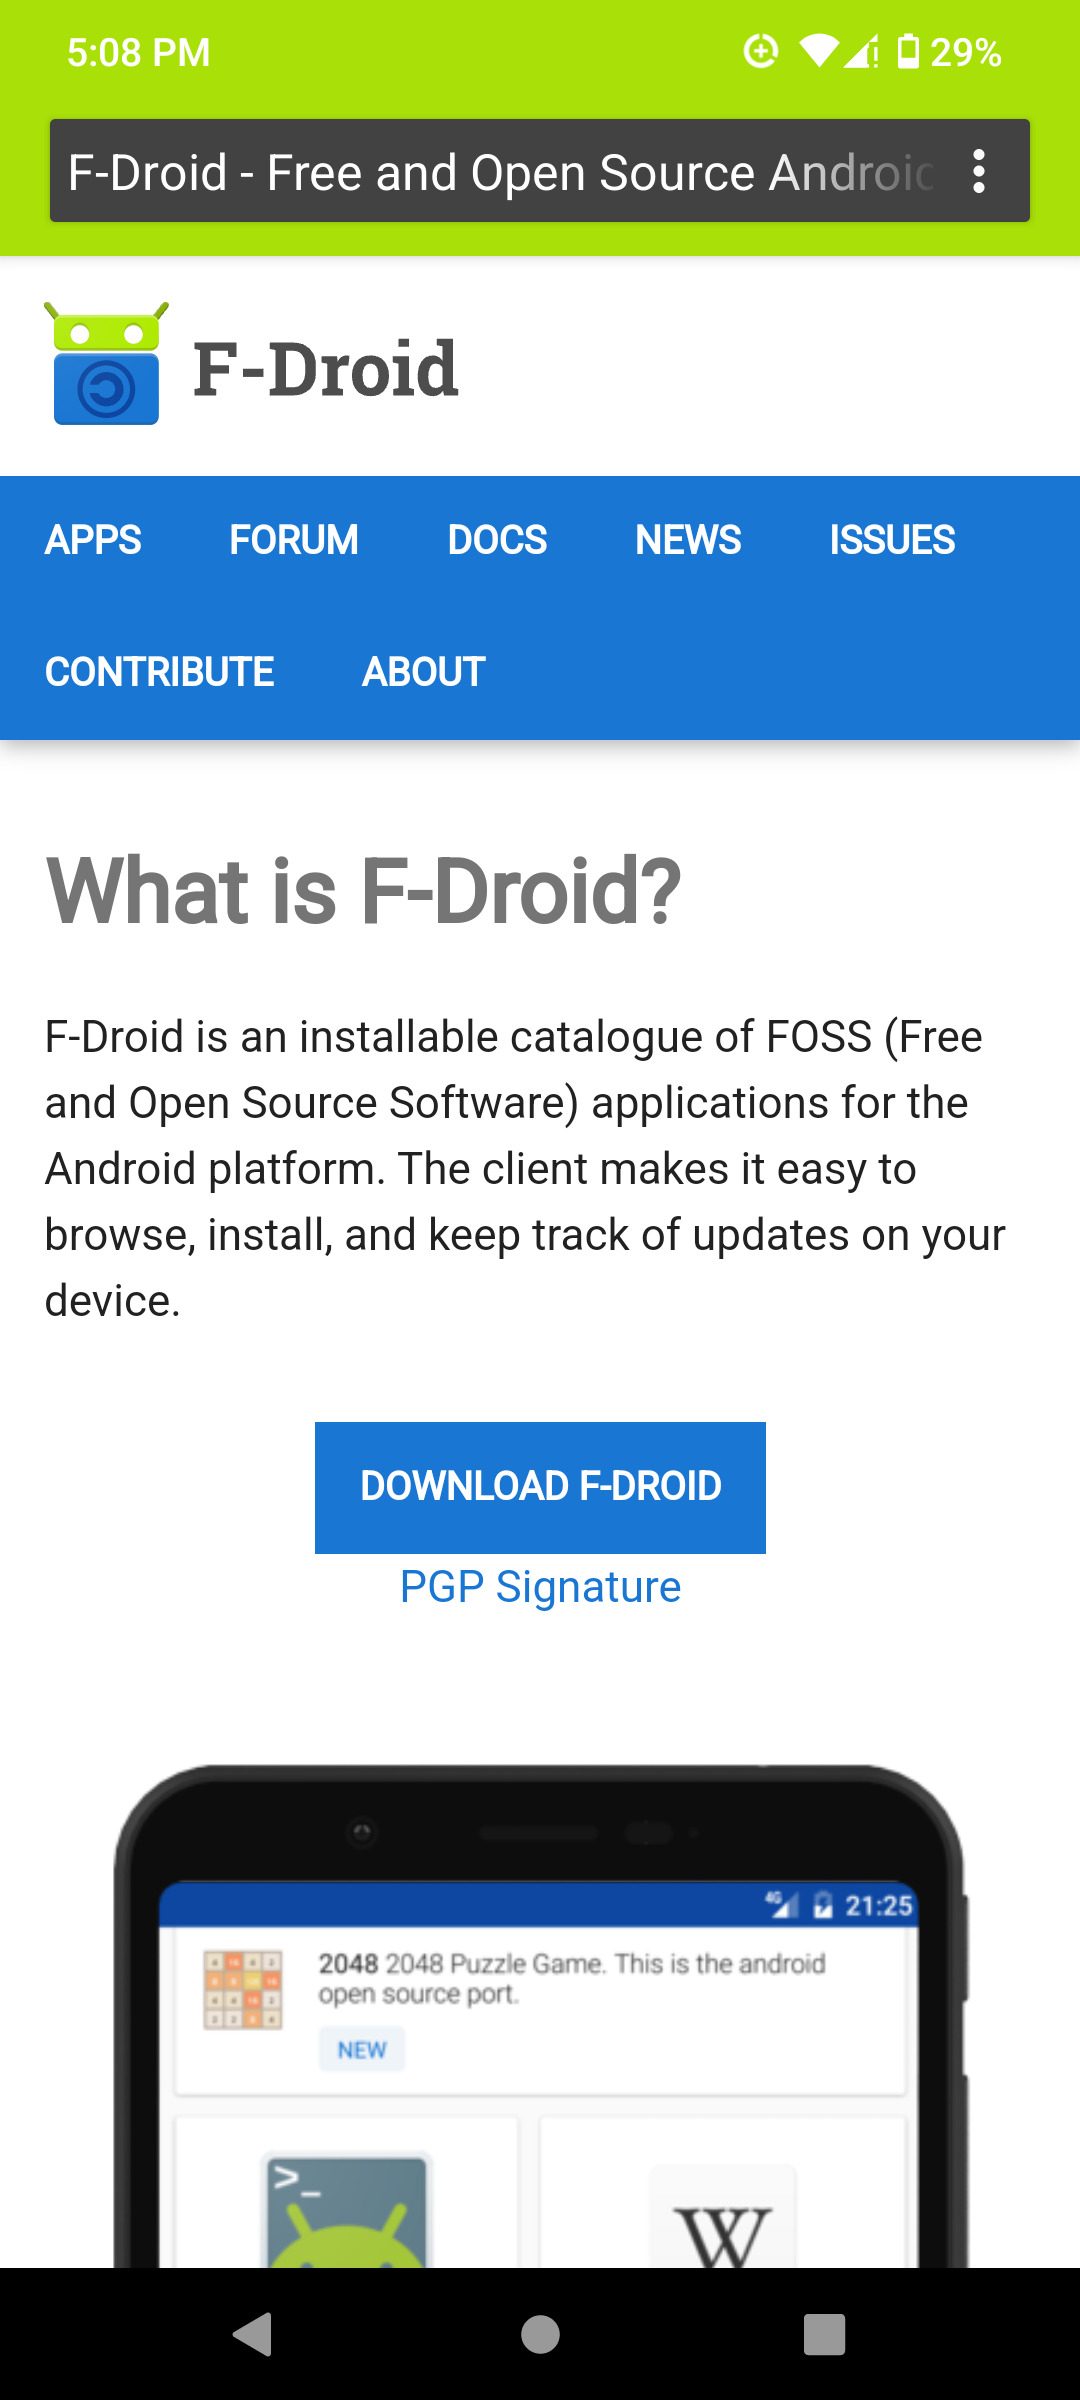 Picture of F-Droid's website